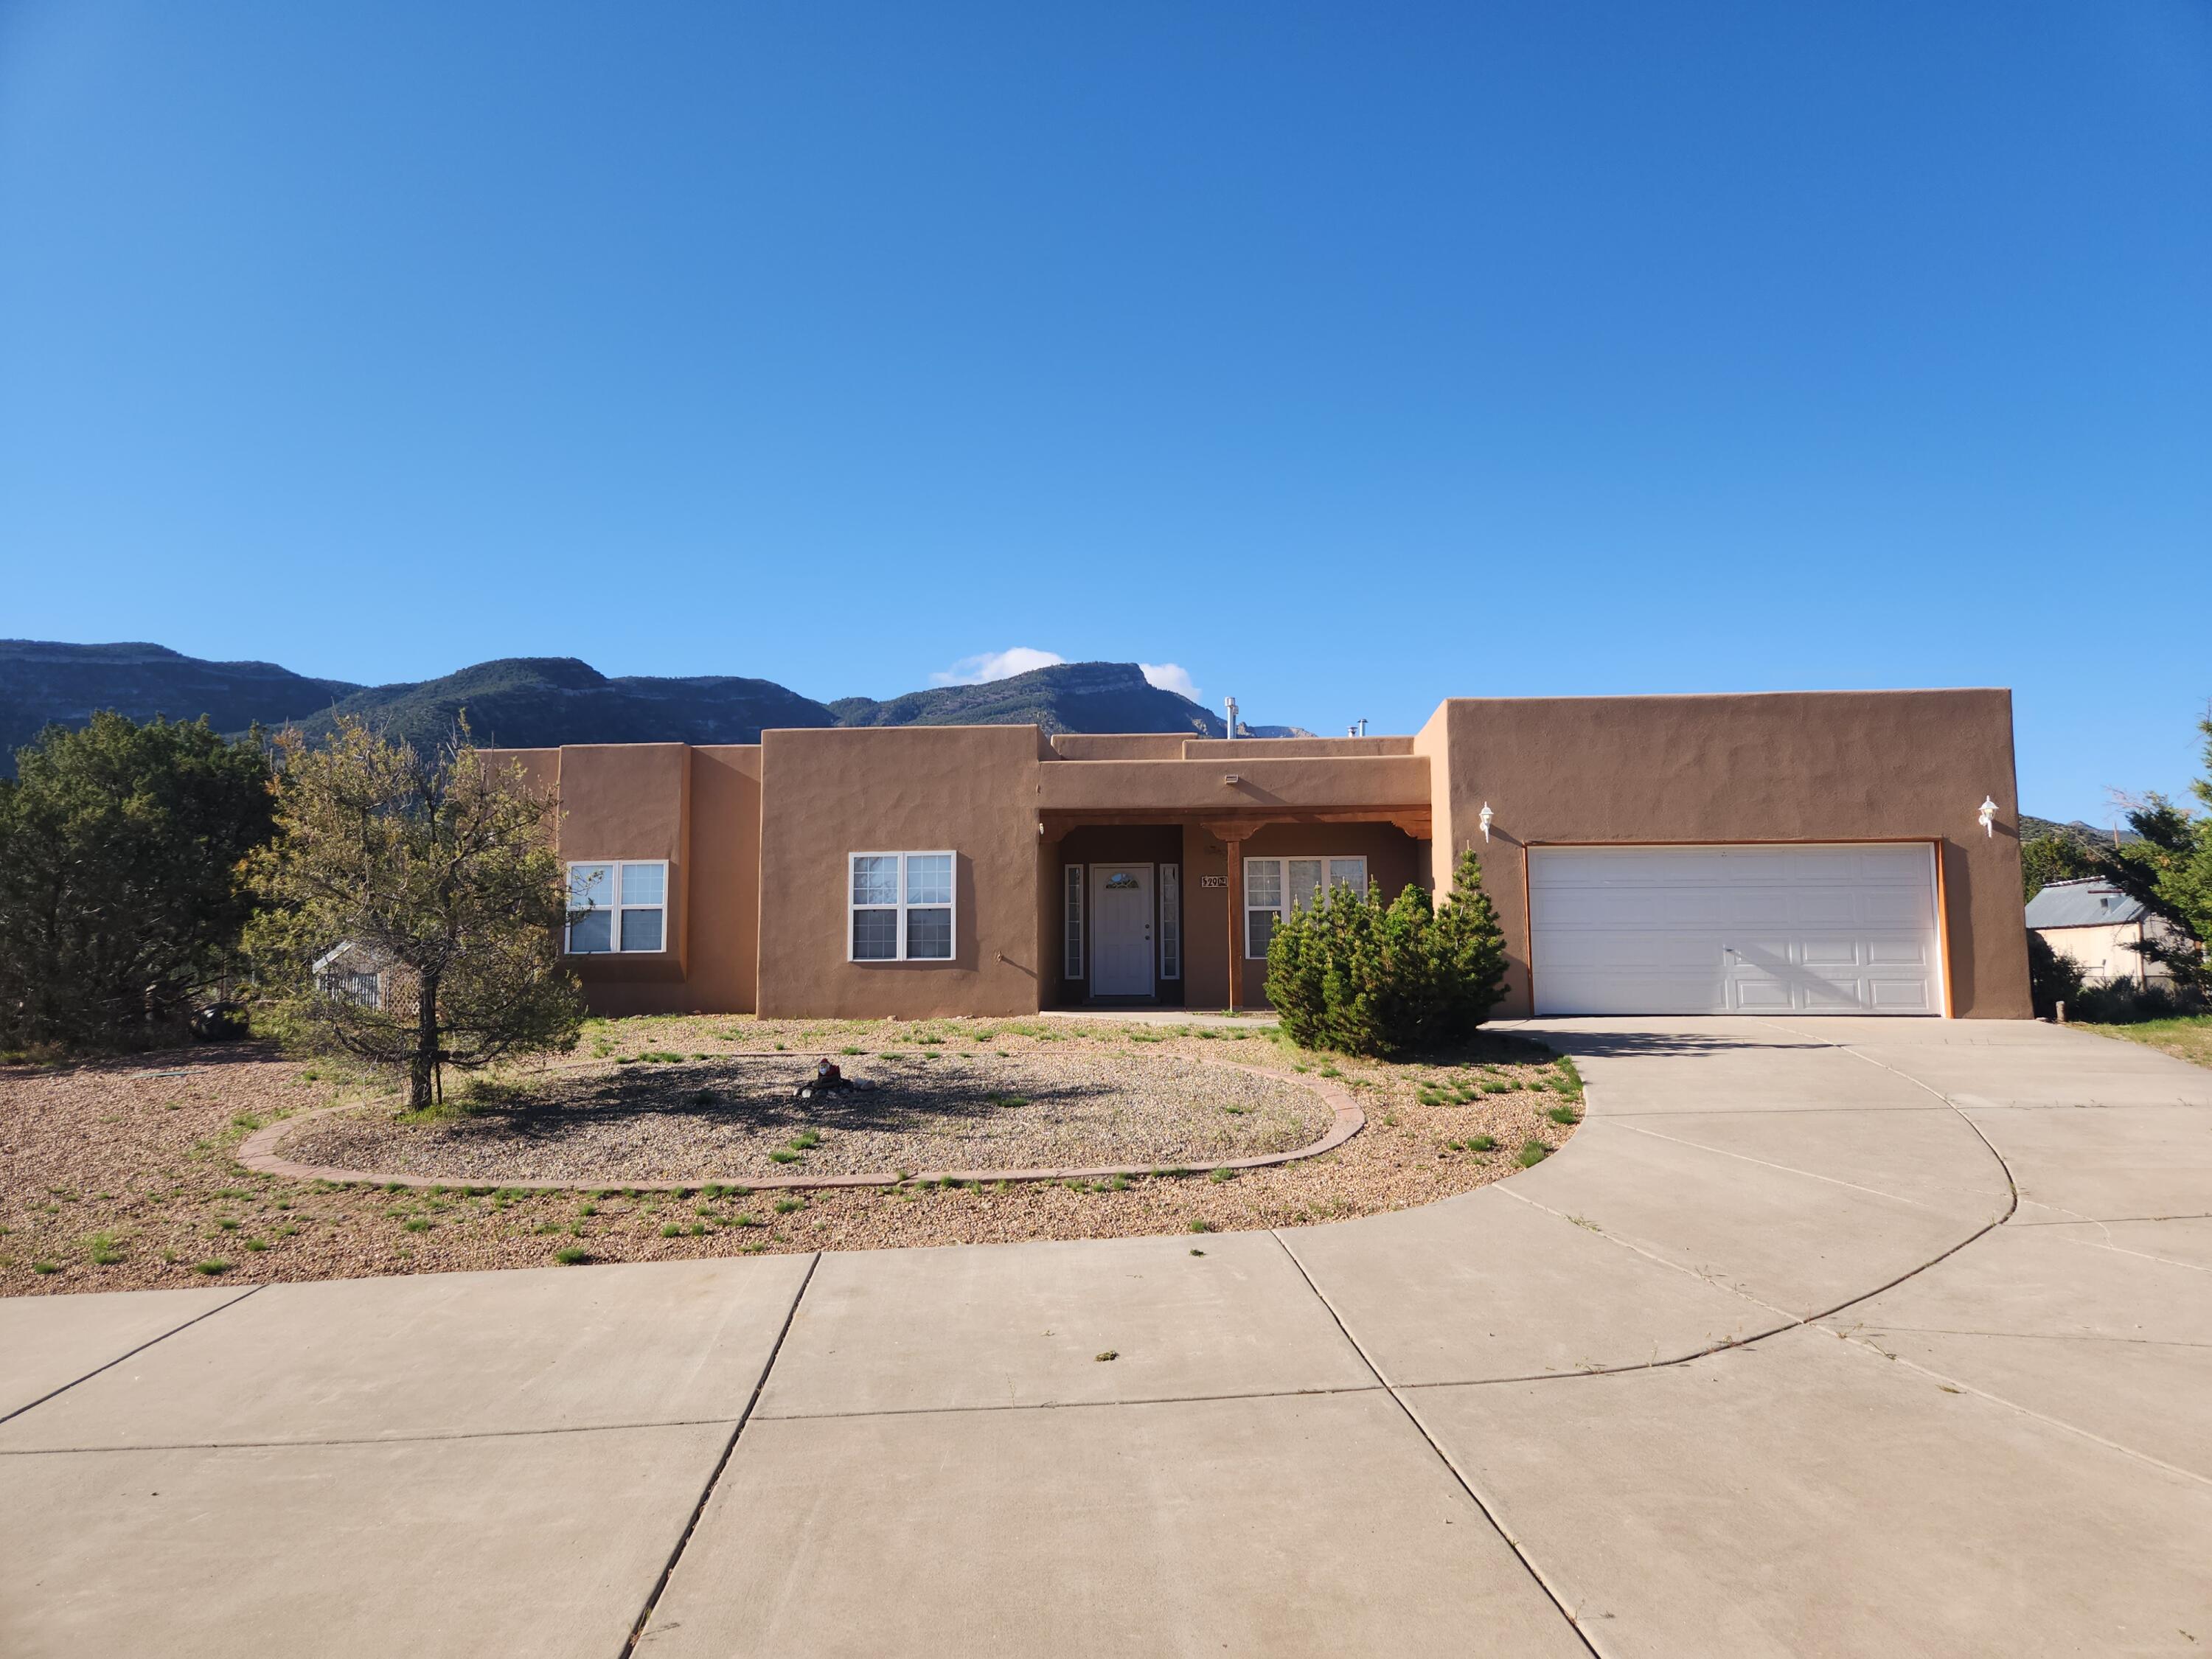 3 BEDROOM WITH EXTRA WORKSHOP/GARAGE! $660,000. Quiet location, convenient to Highway 165, this 3 bedroom + office is move-in ready! New kitchen appliances and new tile & carpet! Single level 2,315 sq ft home, with Sandia views from living, dining, breakfast nook, kitchen & primary bedroom. Southwest style home with (attached) 2 car garage + 971 sq ft (detached) workshop/3 car garage - great for artists, car enthusiasts, storage, etc! Comfortable floor plan with office (and half bath) just off the front entry. Primary bedroom has walk-in closet. Skylights give this home wonderful natural light! Gas log fireplace in the spacious living room and pellet stove in dining. Brand new septic tank. Less than a 1/2 mile from Hwy 165 & only a 20 minute drive to Albuquerque! No covenants & no HOA!